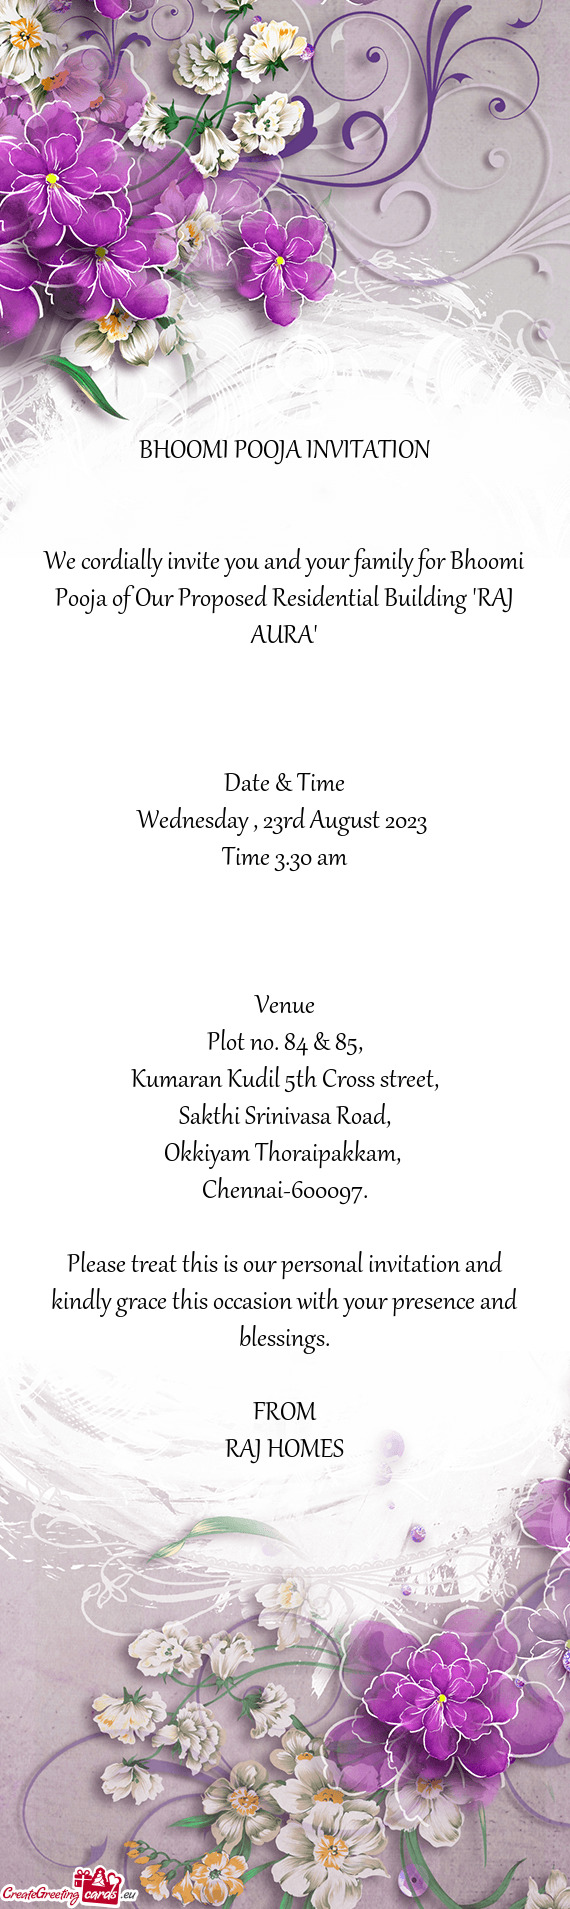 We cordially invite you and your family for Bhoomi Pooja of Our Proposed Residential Building "RAJ A